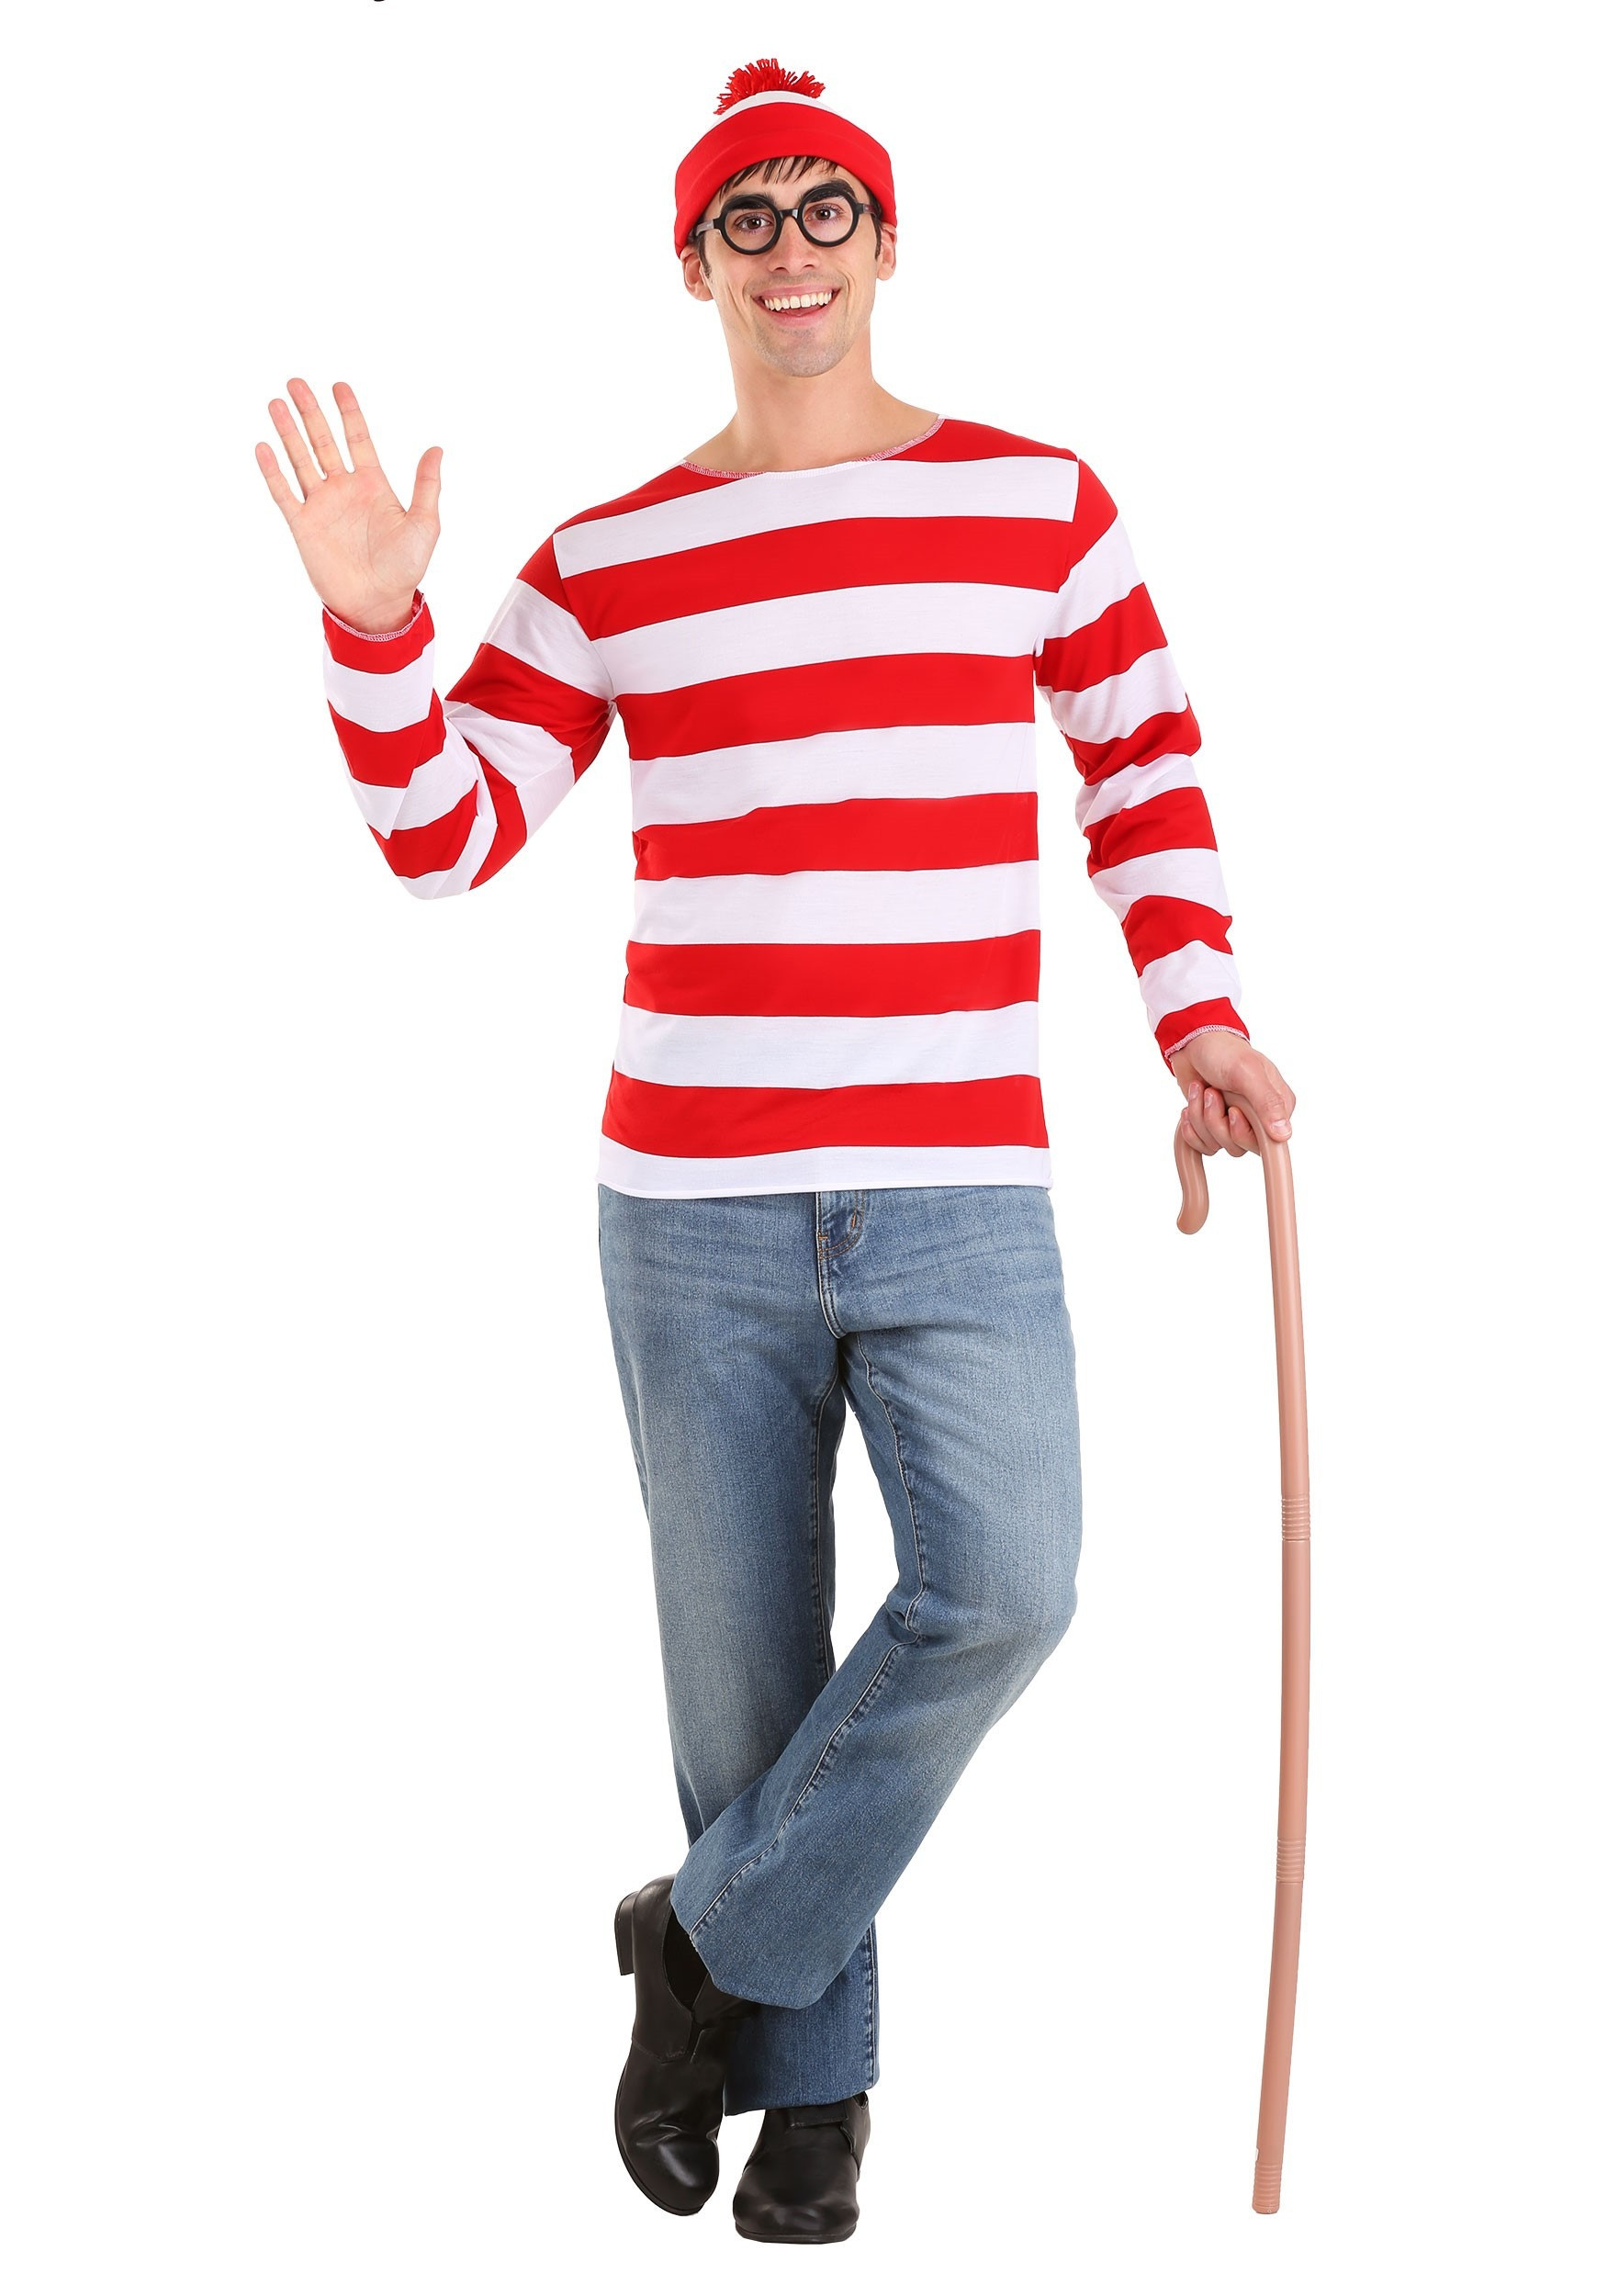 35 Ideas for Diy Waldo Costume – Home, Family, Style and Art Ideas